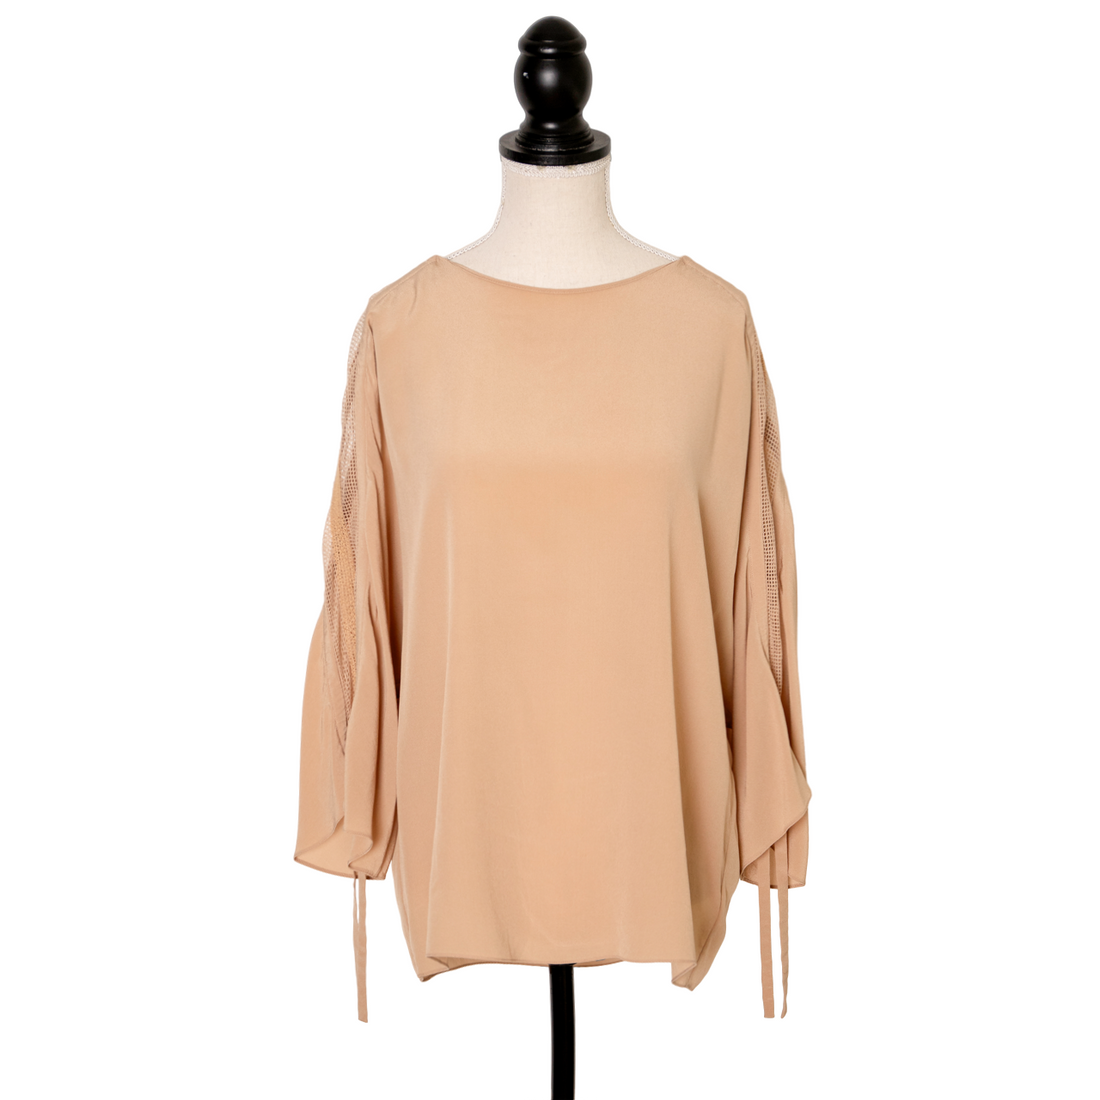 Chloé silk top with mesh details